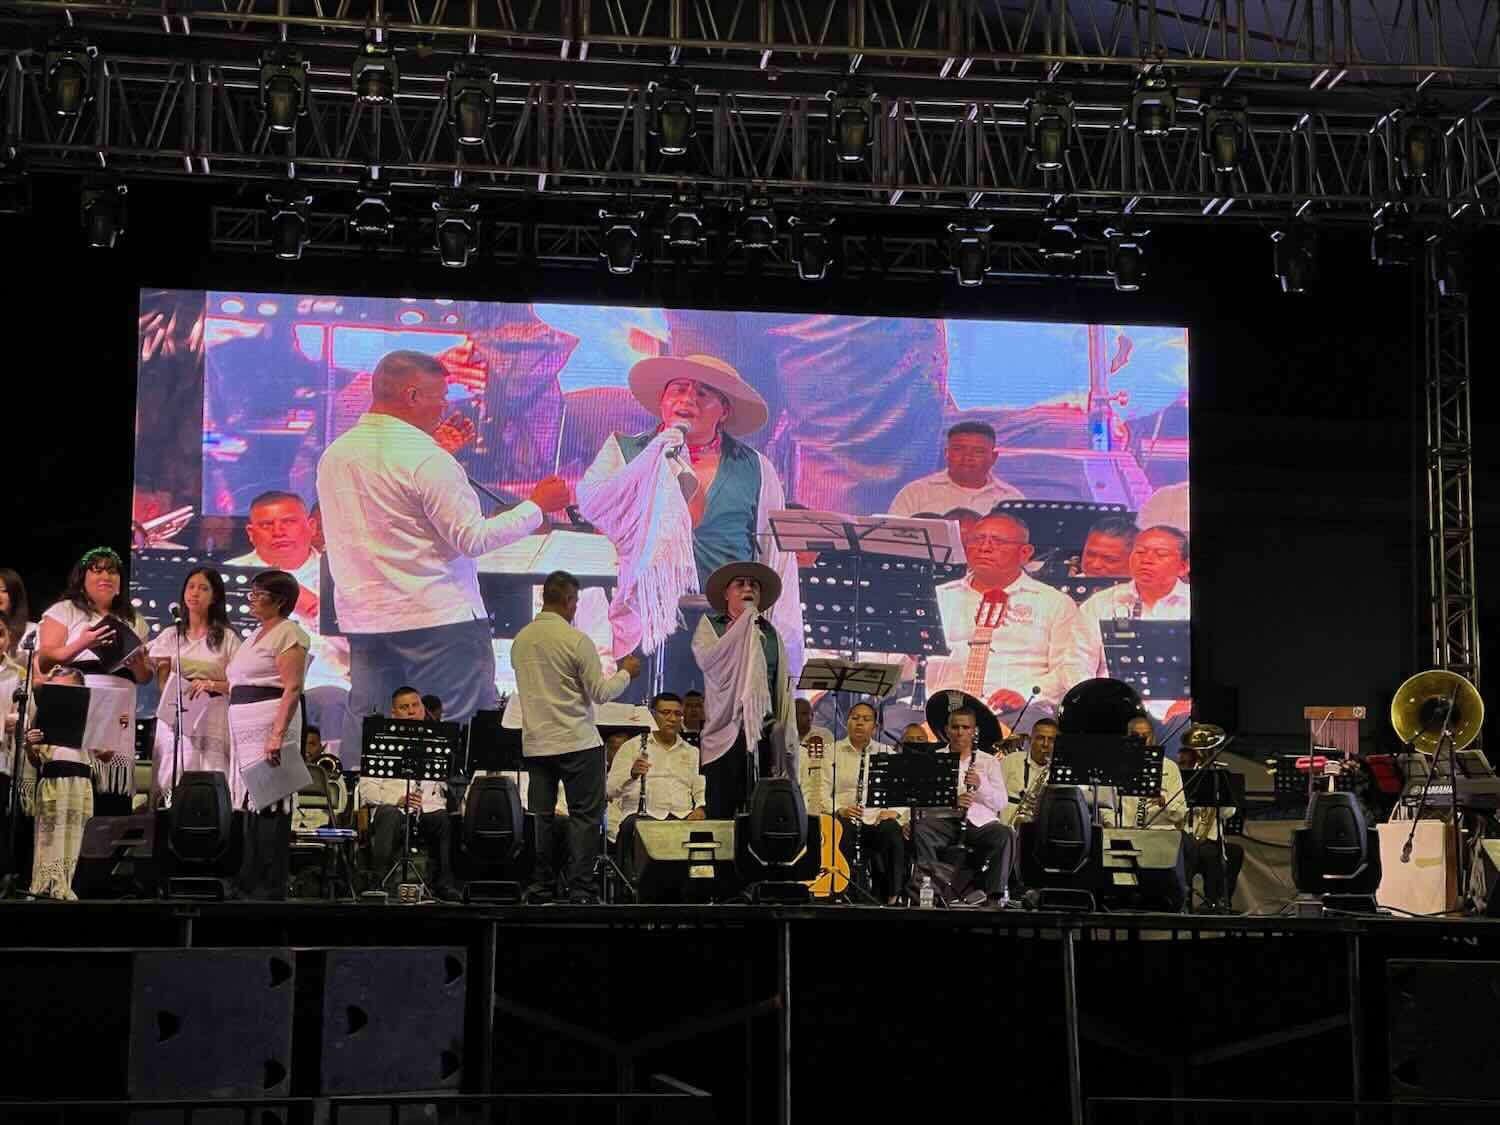 The night before Independence Day, a major concert took place in the central plaza